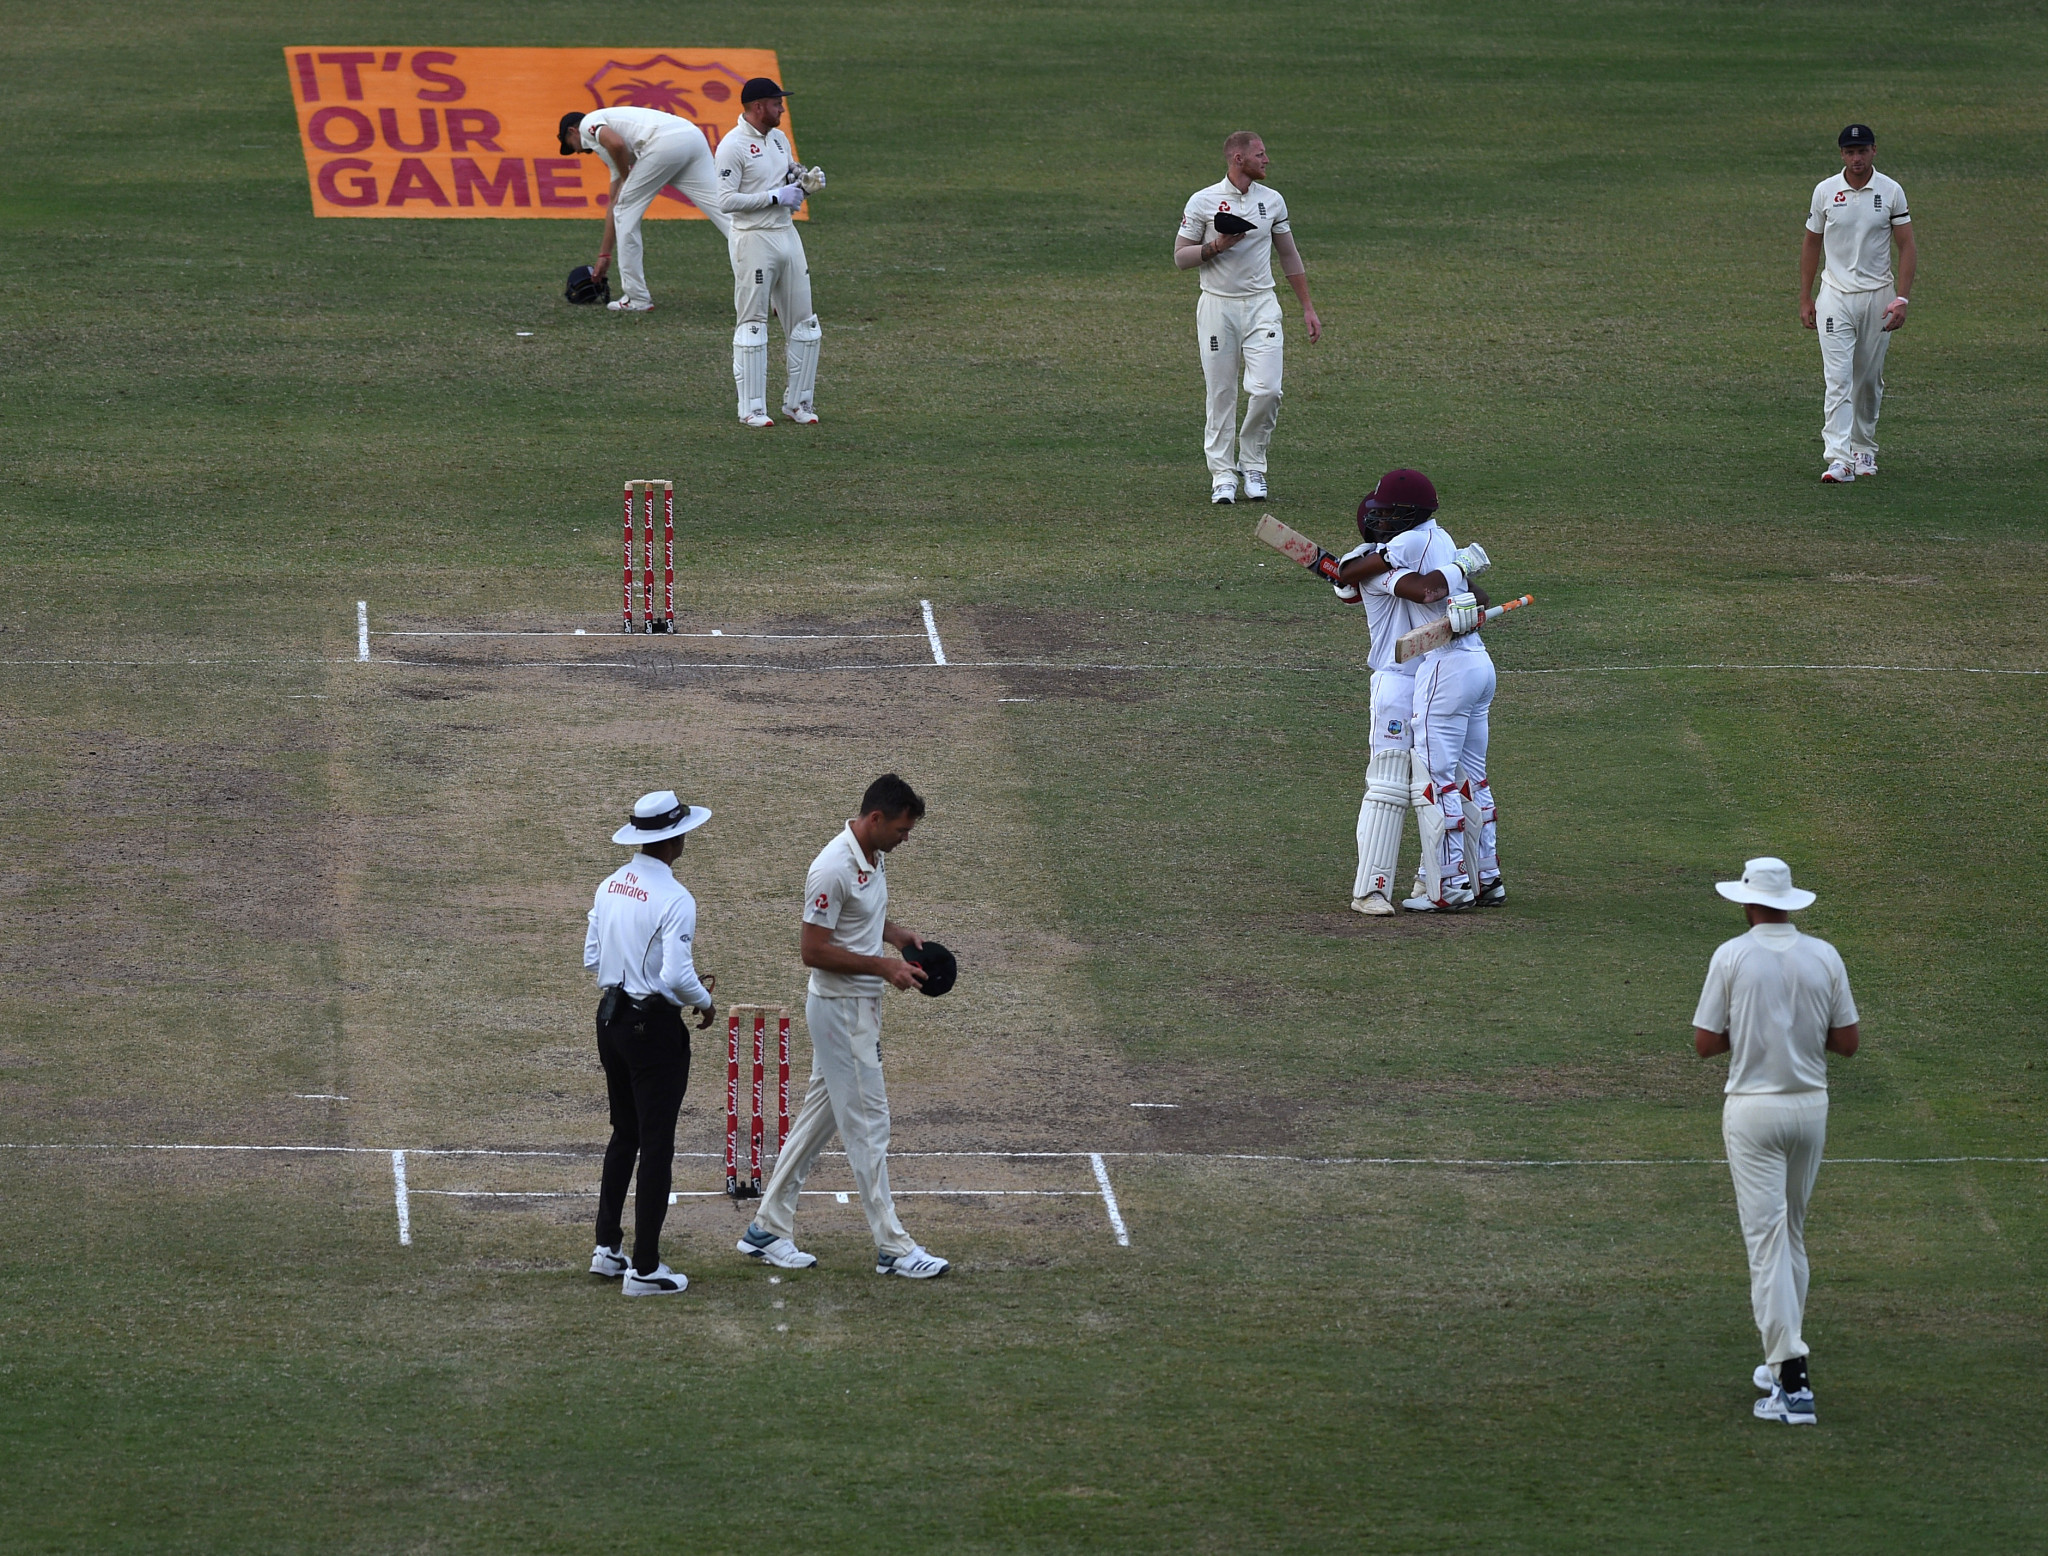 Pitch used for second Test between West Indies and England  rated "below average" by ICC